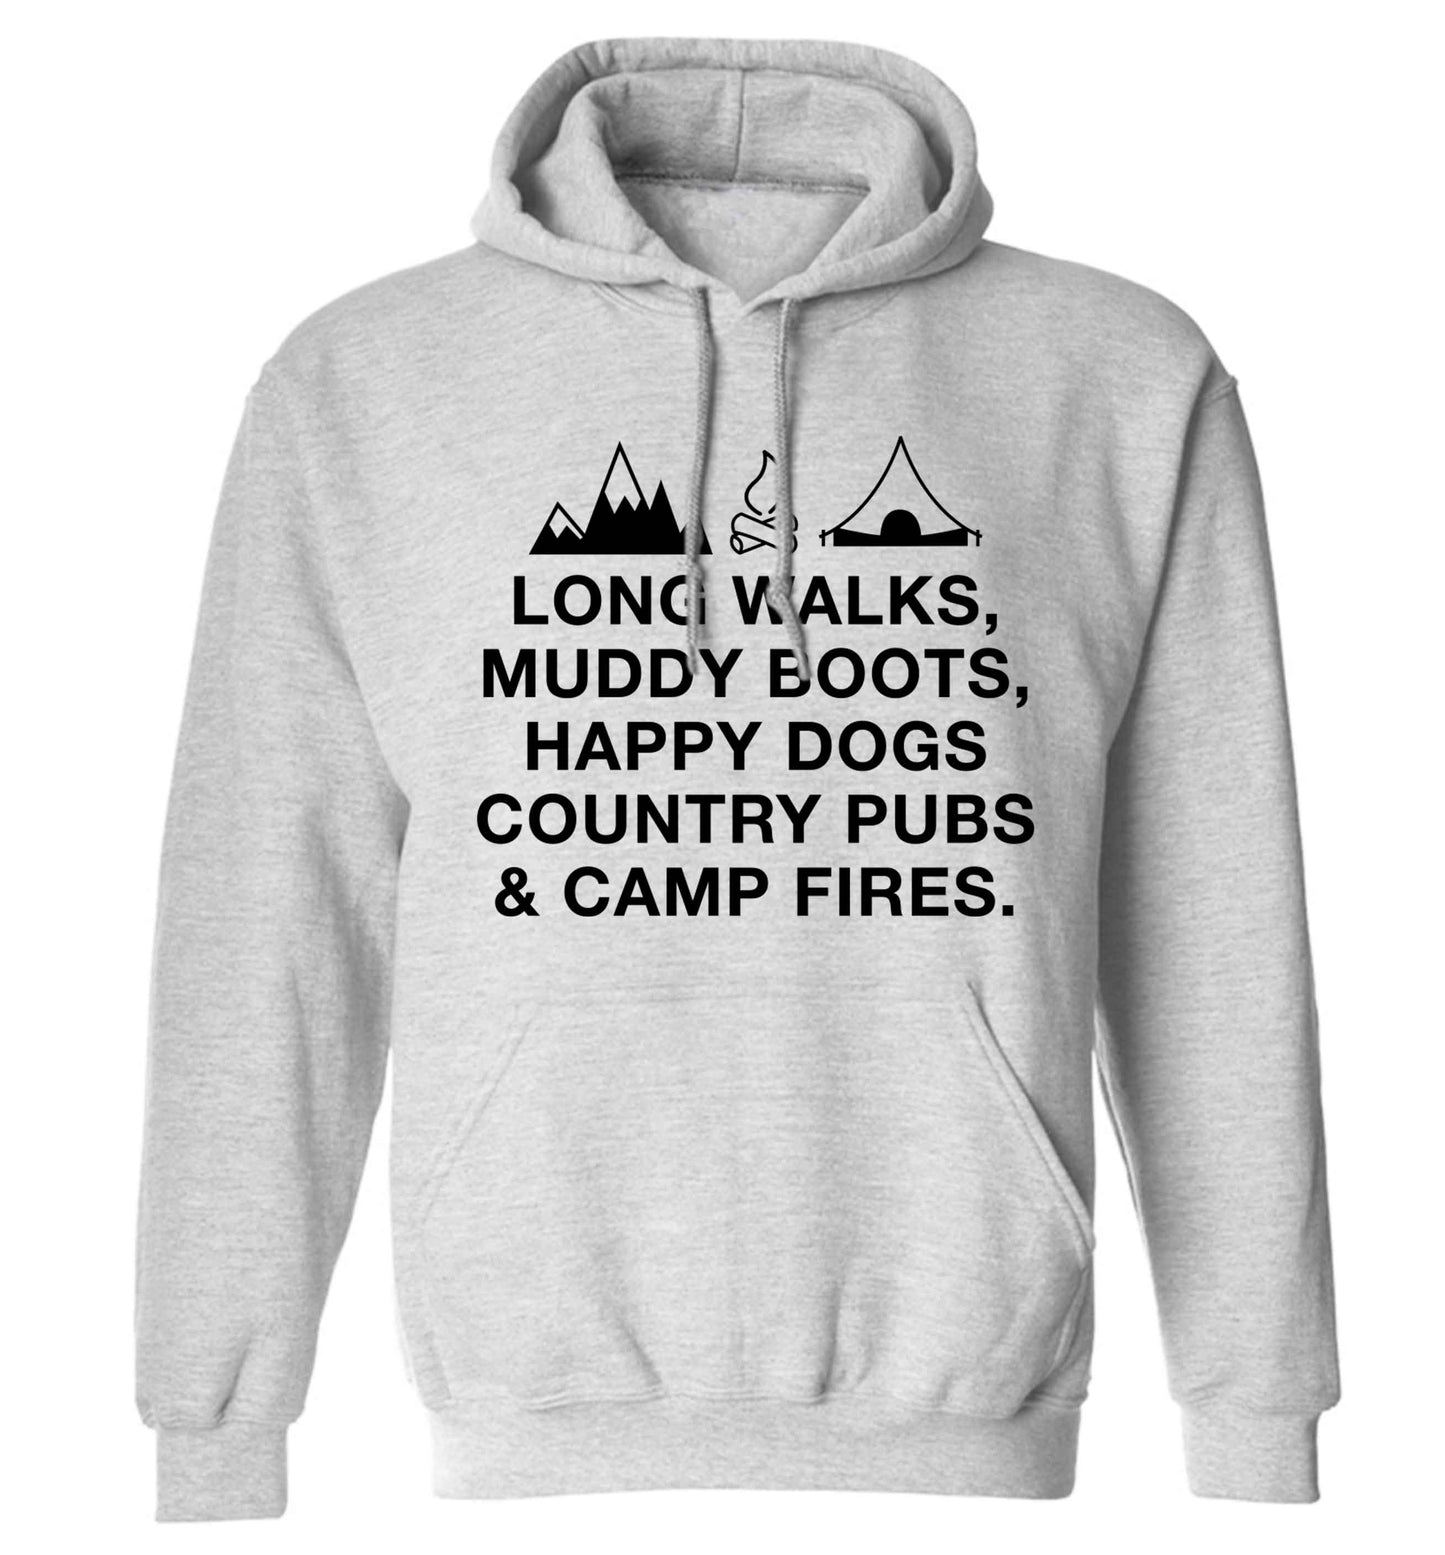 Long walks muddy boots happy dogs country pubs and camp fires adults unisex grey hoodie 2XL